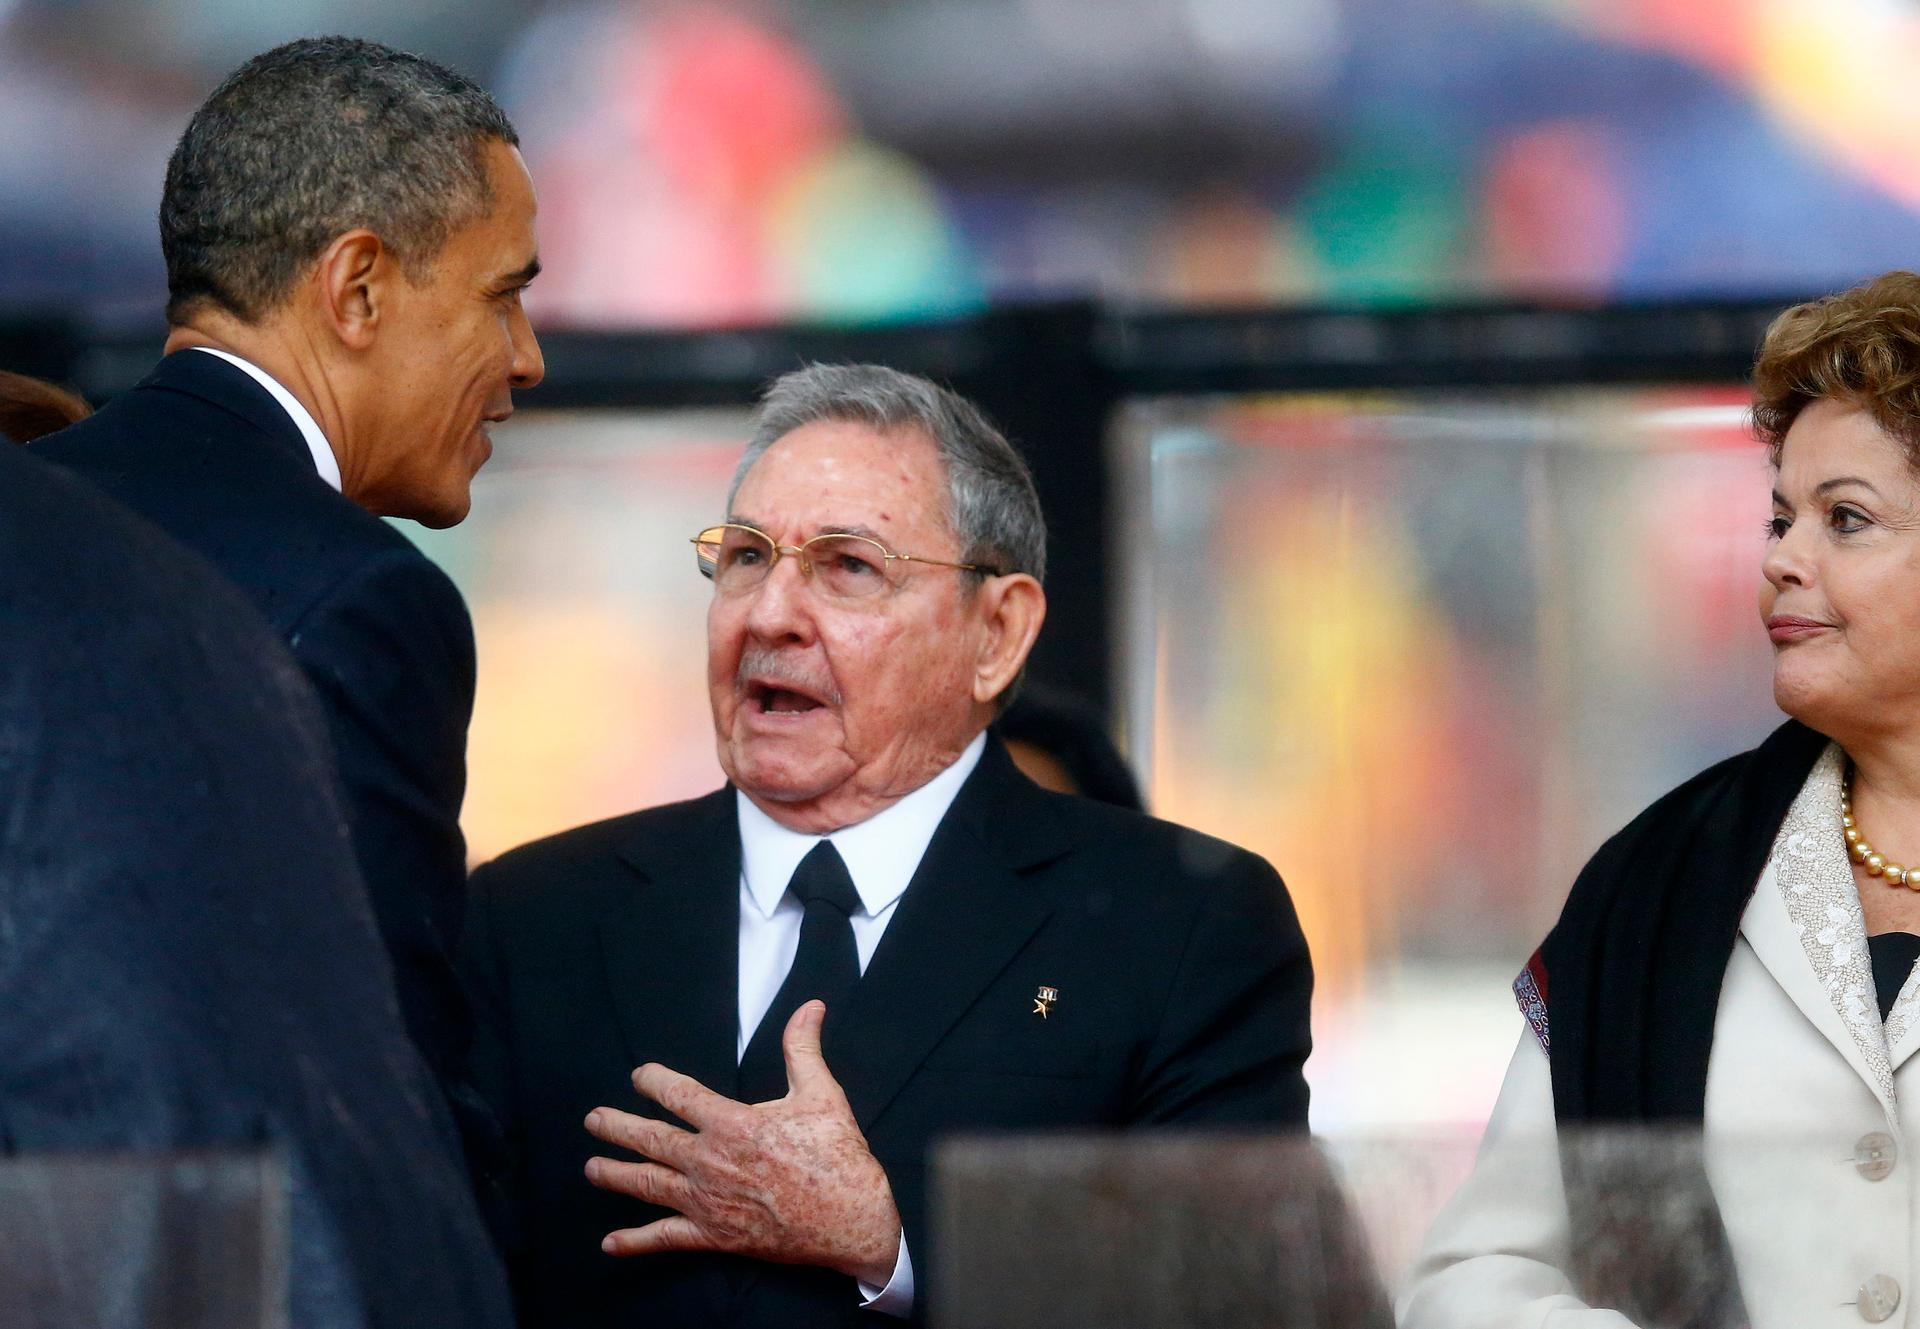 U.S. President Barack Obama greets Cuban President Raul Castro before giving his speech, as Brazil's President Dilma Rousseff looks on, at the memorial service for late South African President Nelson Mandela 